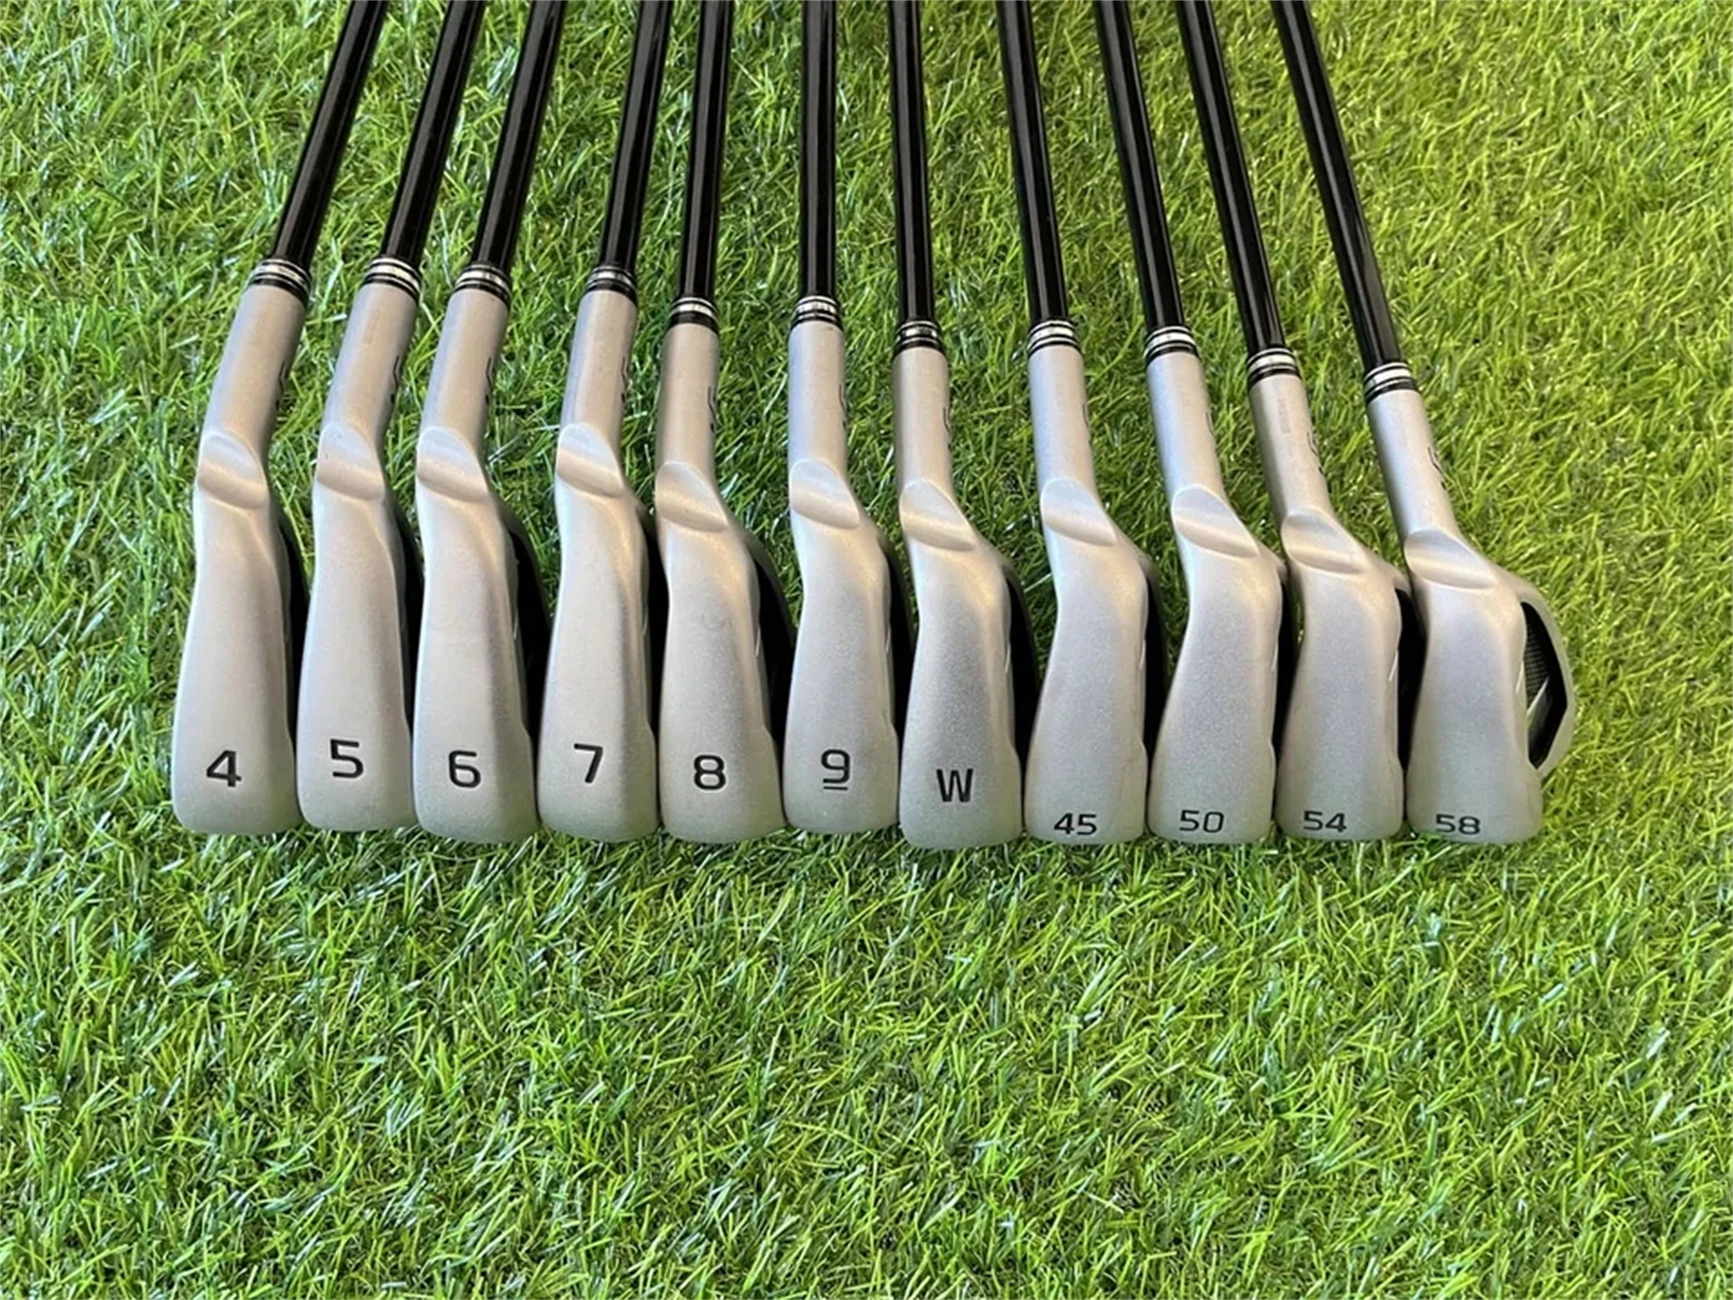 

2023 430 Forged Golf Clubs Irons Set 4-9W/45/50/54/58 R/S Steel/Graphite Shafts Including Headcovers Quick Shipping